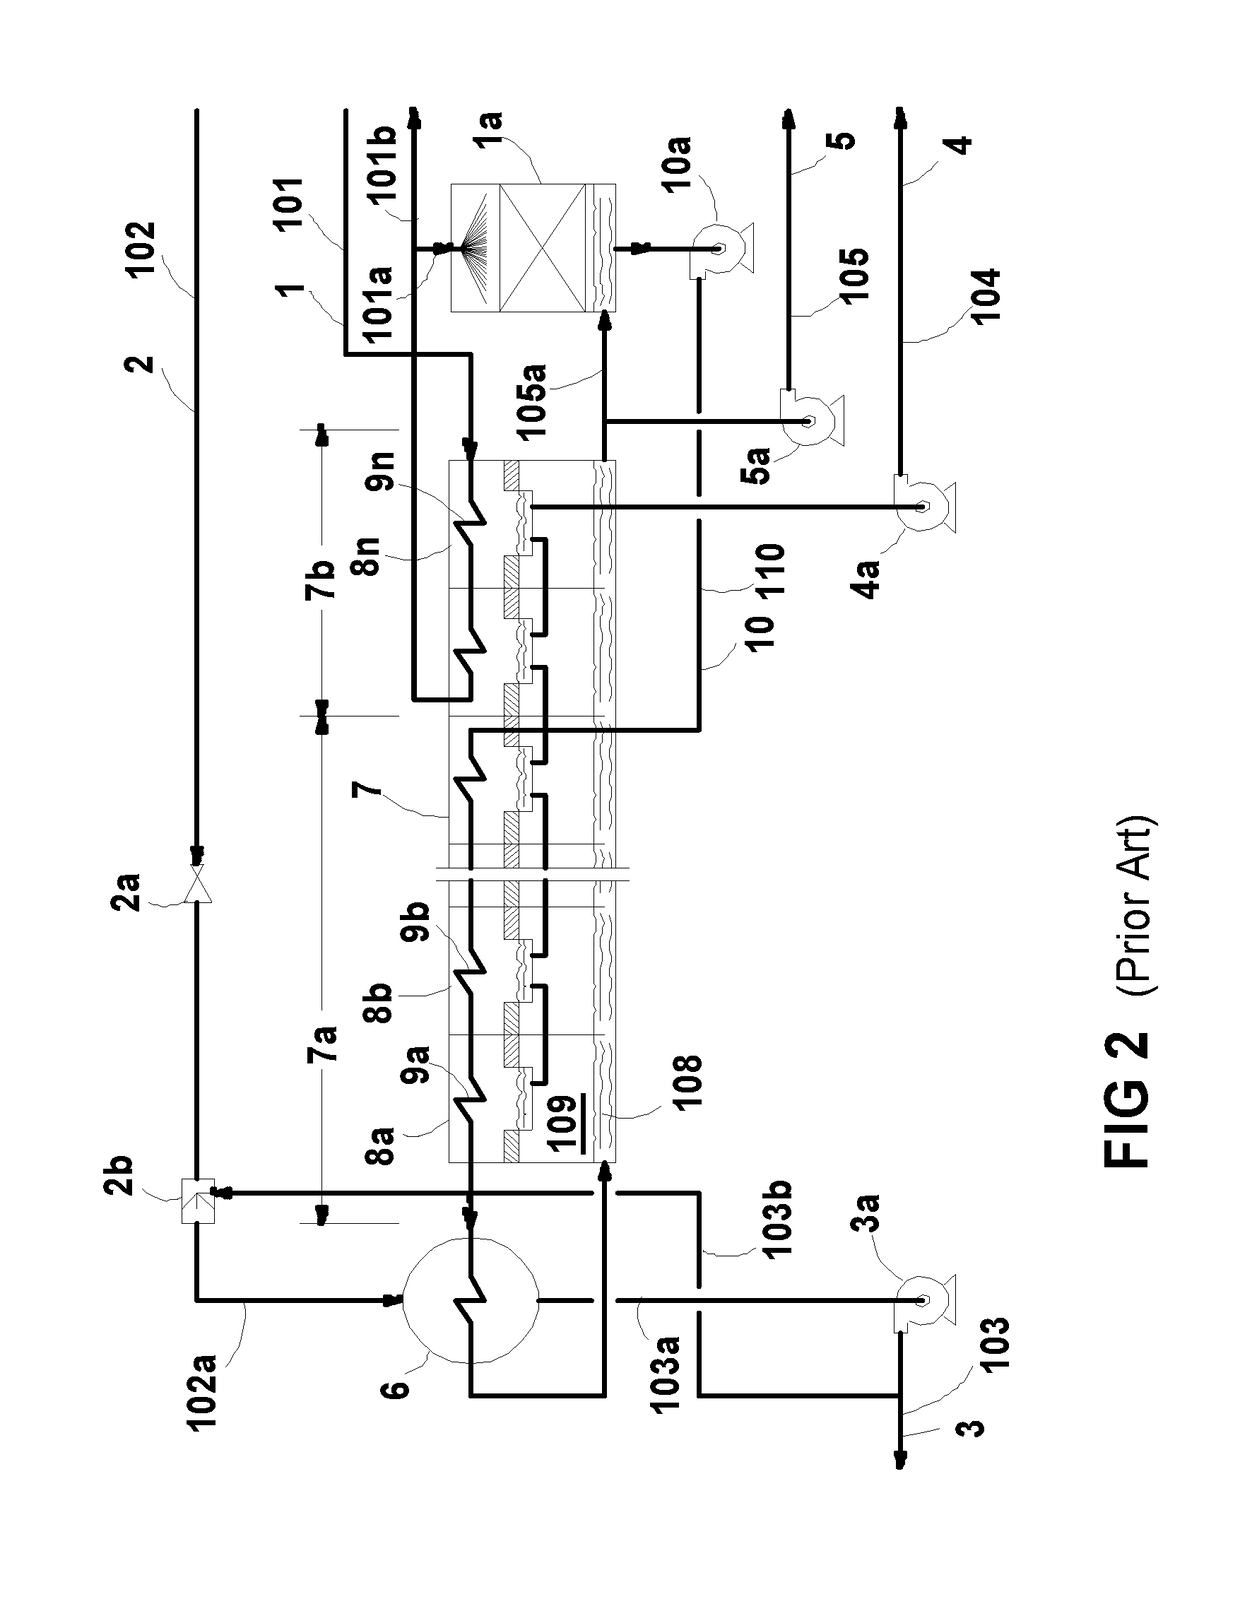 Multi-stage flash desalination system with thermal vapor compressor